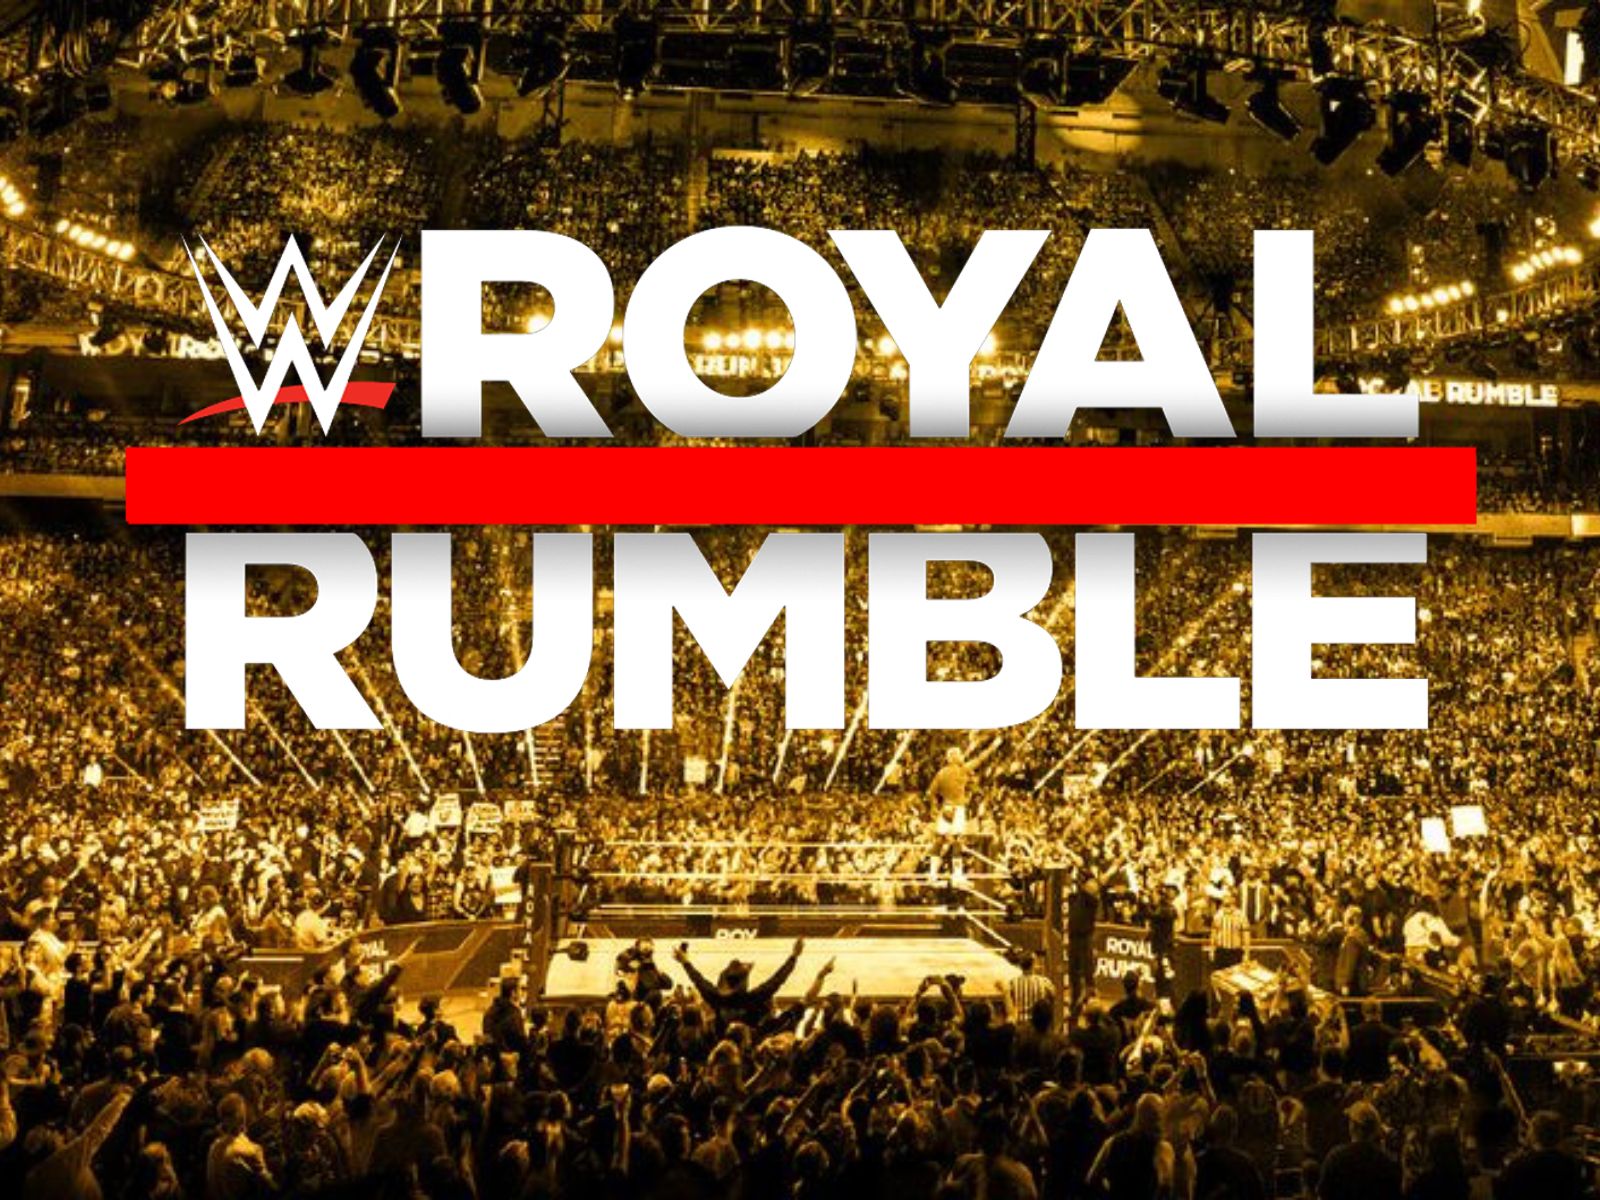 CM Punk Signs With WWE RAW, Enters 2024 WWE Royal Rumble